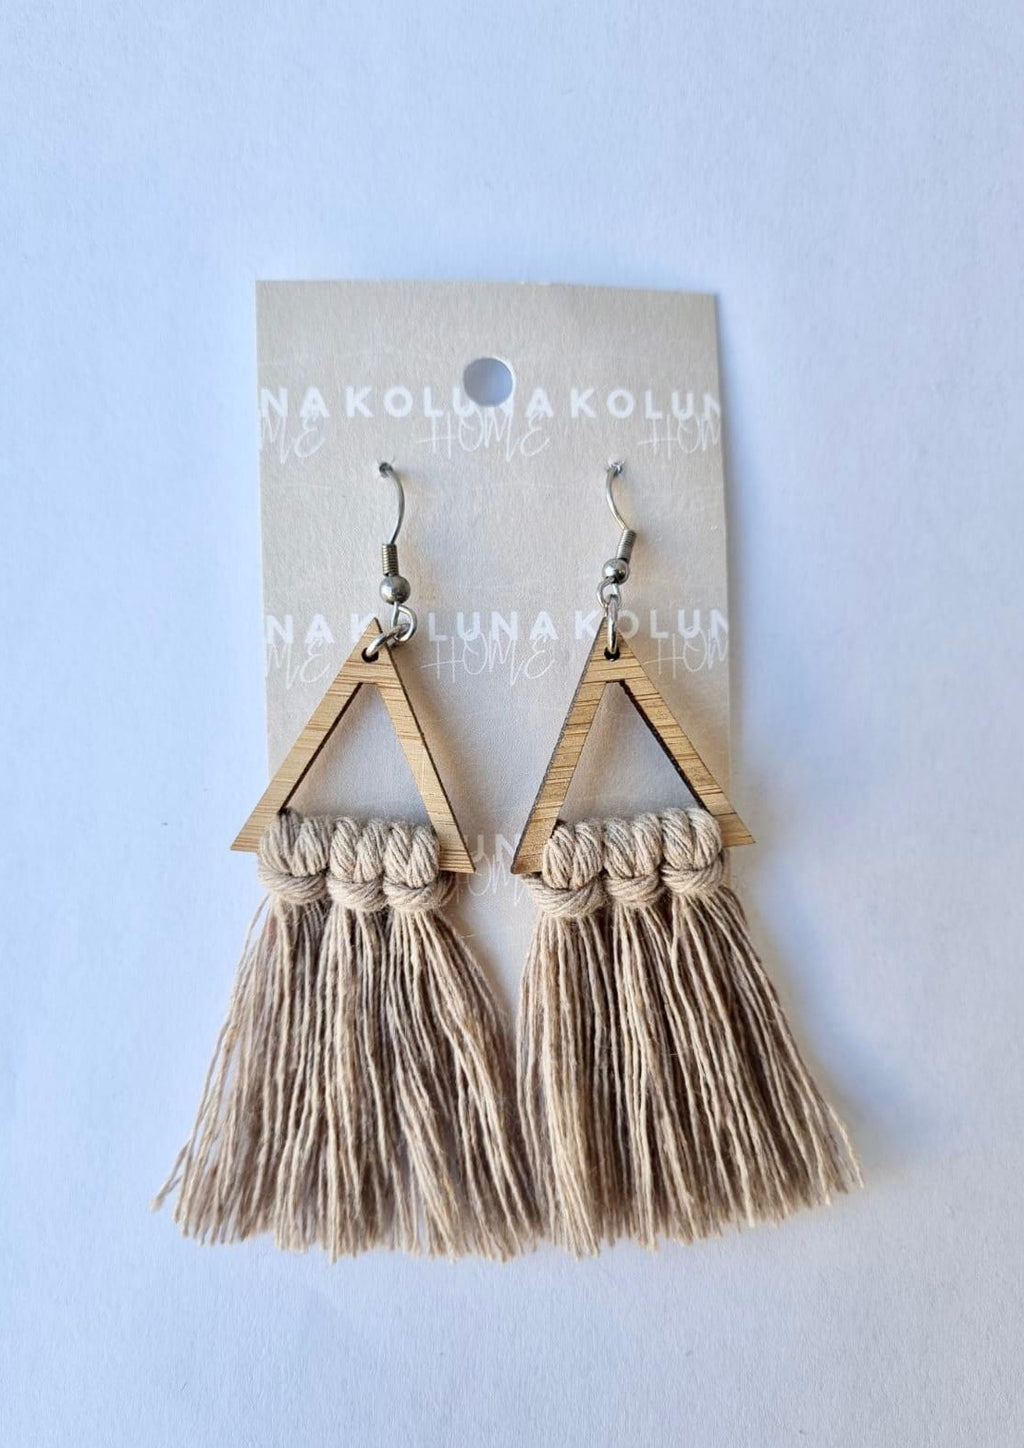 Triangle Bamboo Earrings - Natural The Earrings that go with everything! And look gorgeous with our matching Macrame clutch/cross body bags. Details and materials: Triangle shape lightweight bamboo frame Rope is 100% Recycled Cotton Hooks are surgical steel Handmade in NZ